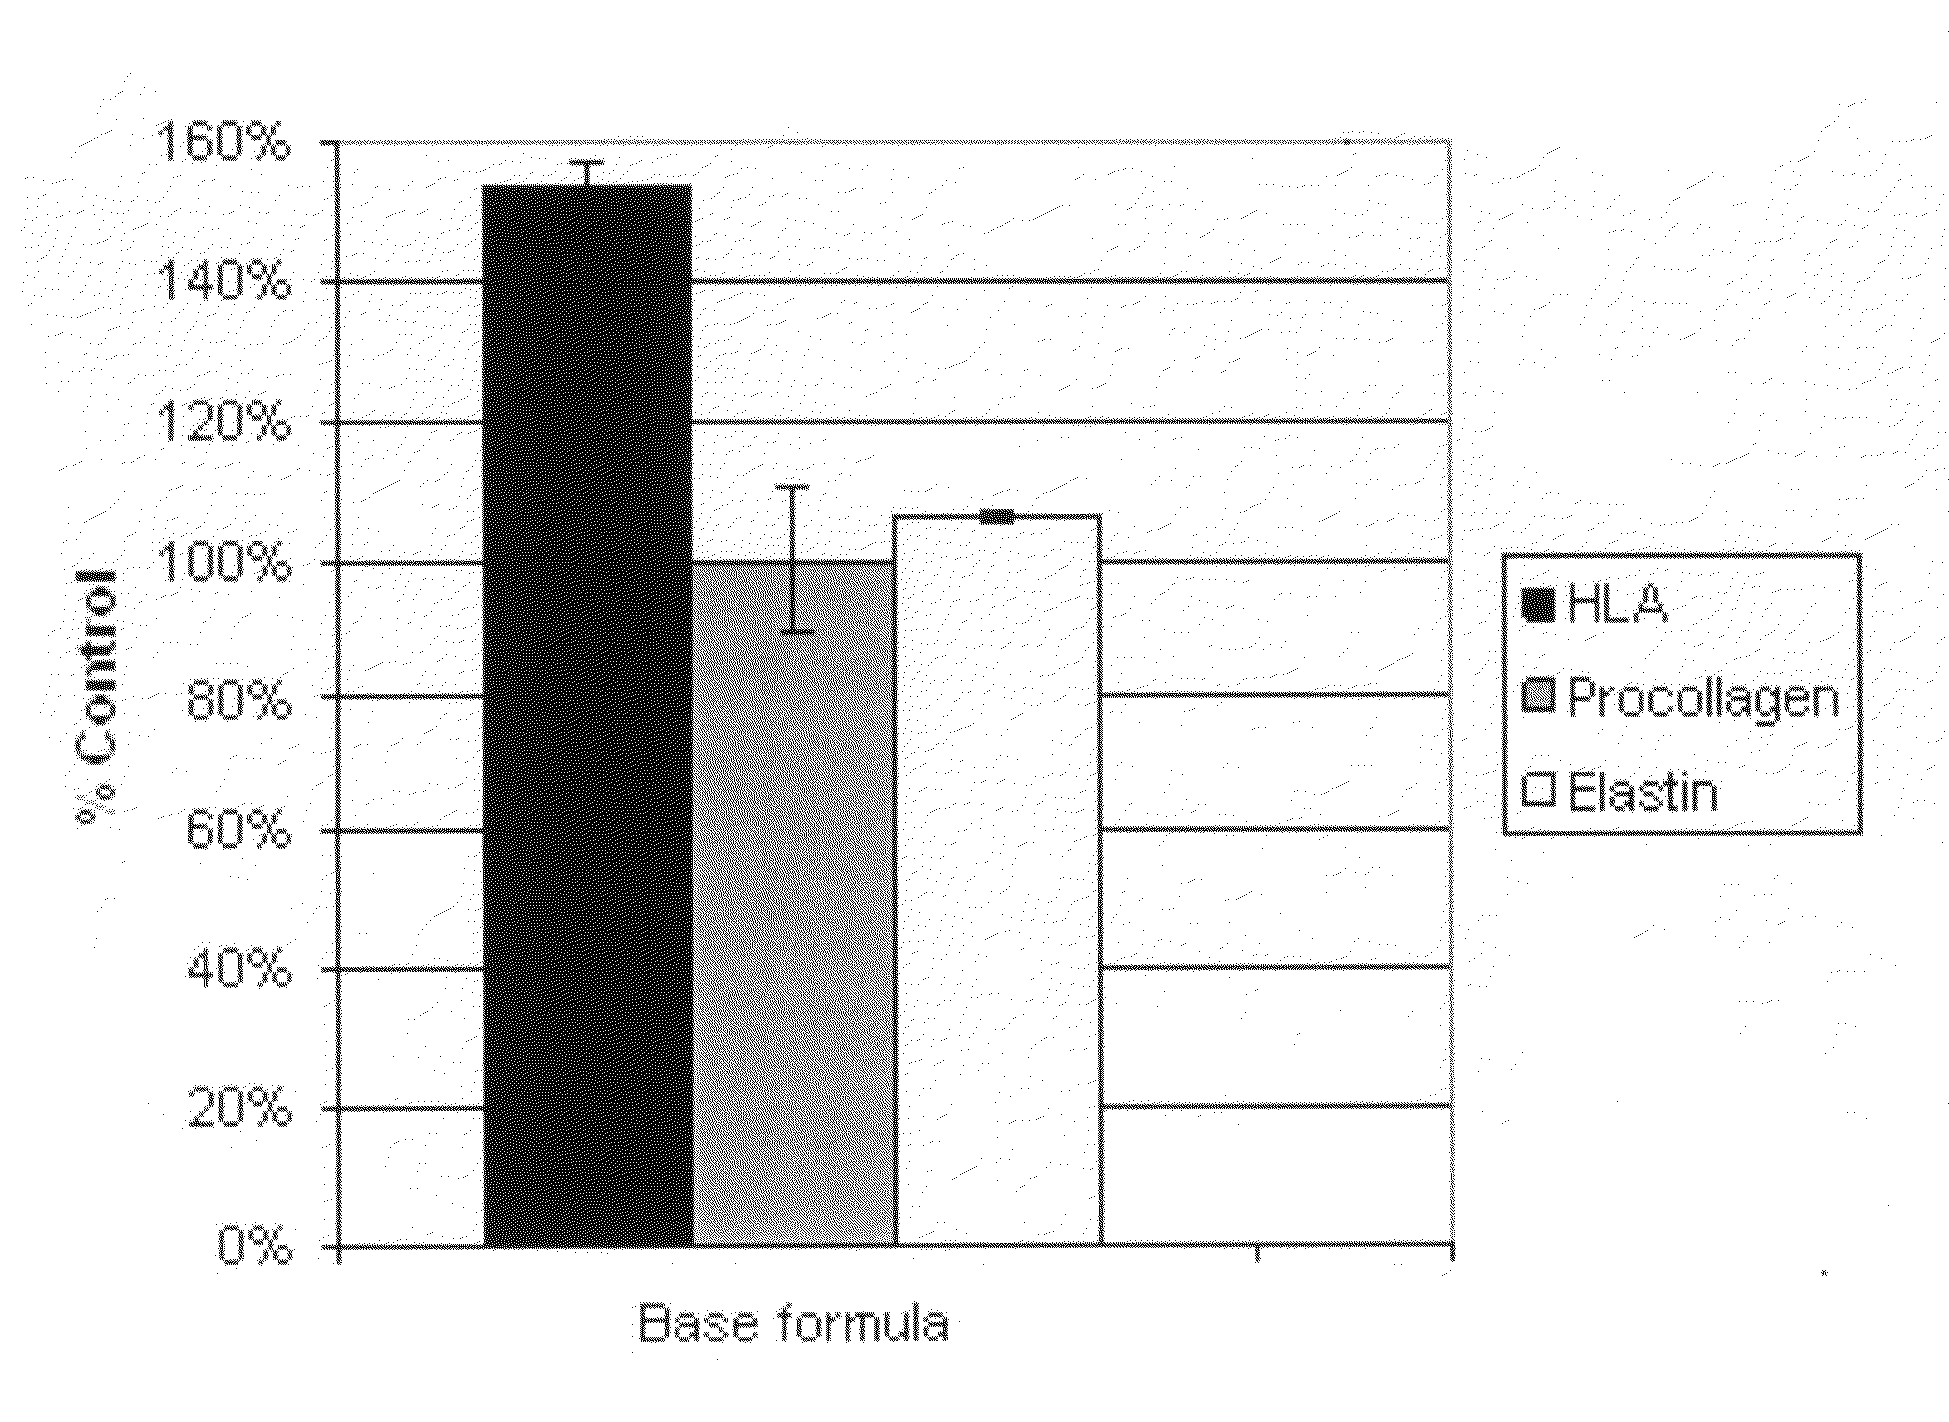 Skin firming and lifting compositions and methods of use